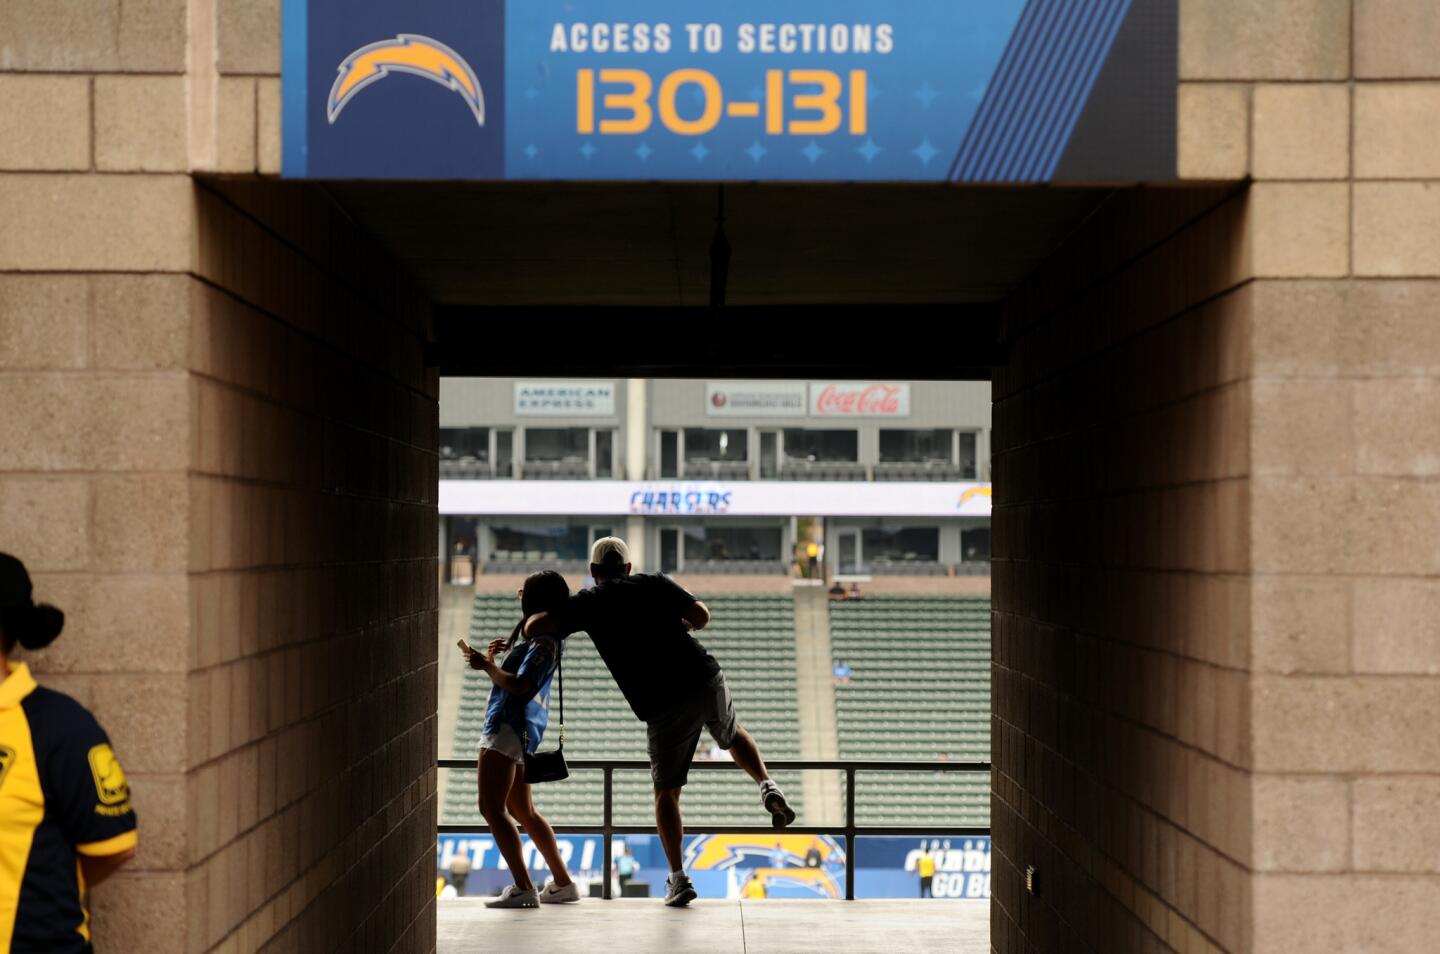 First home game for new L.A. Chargers